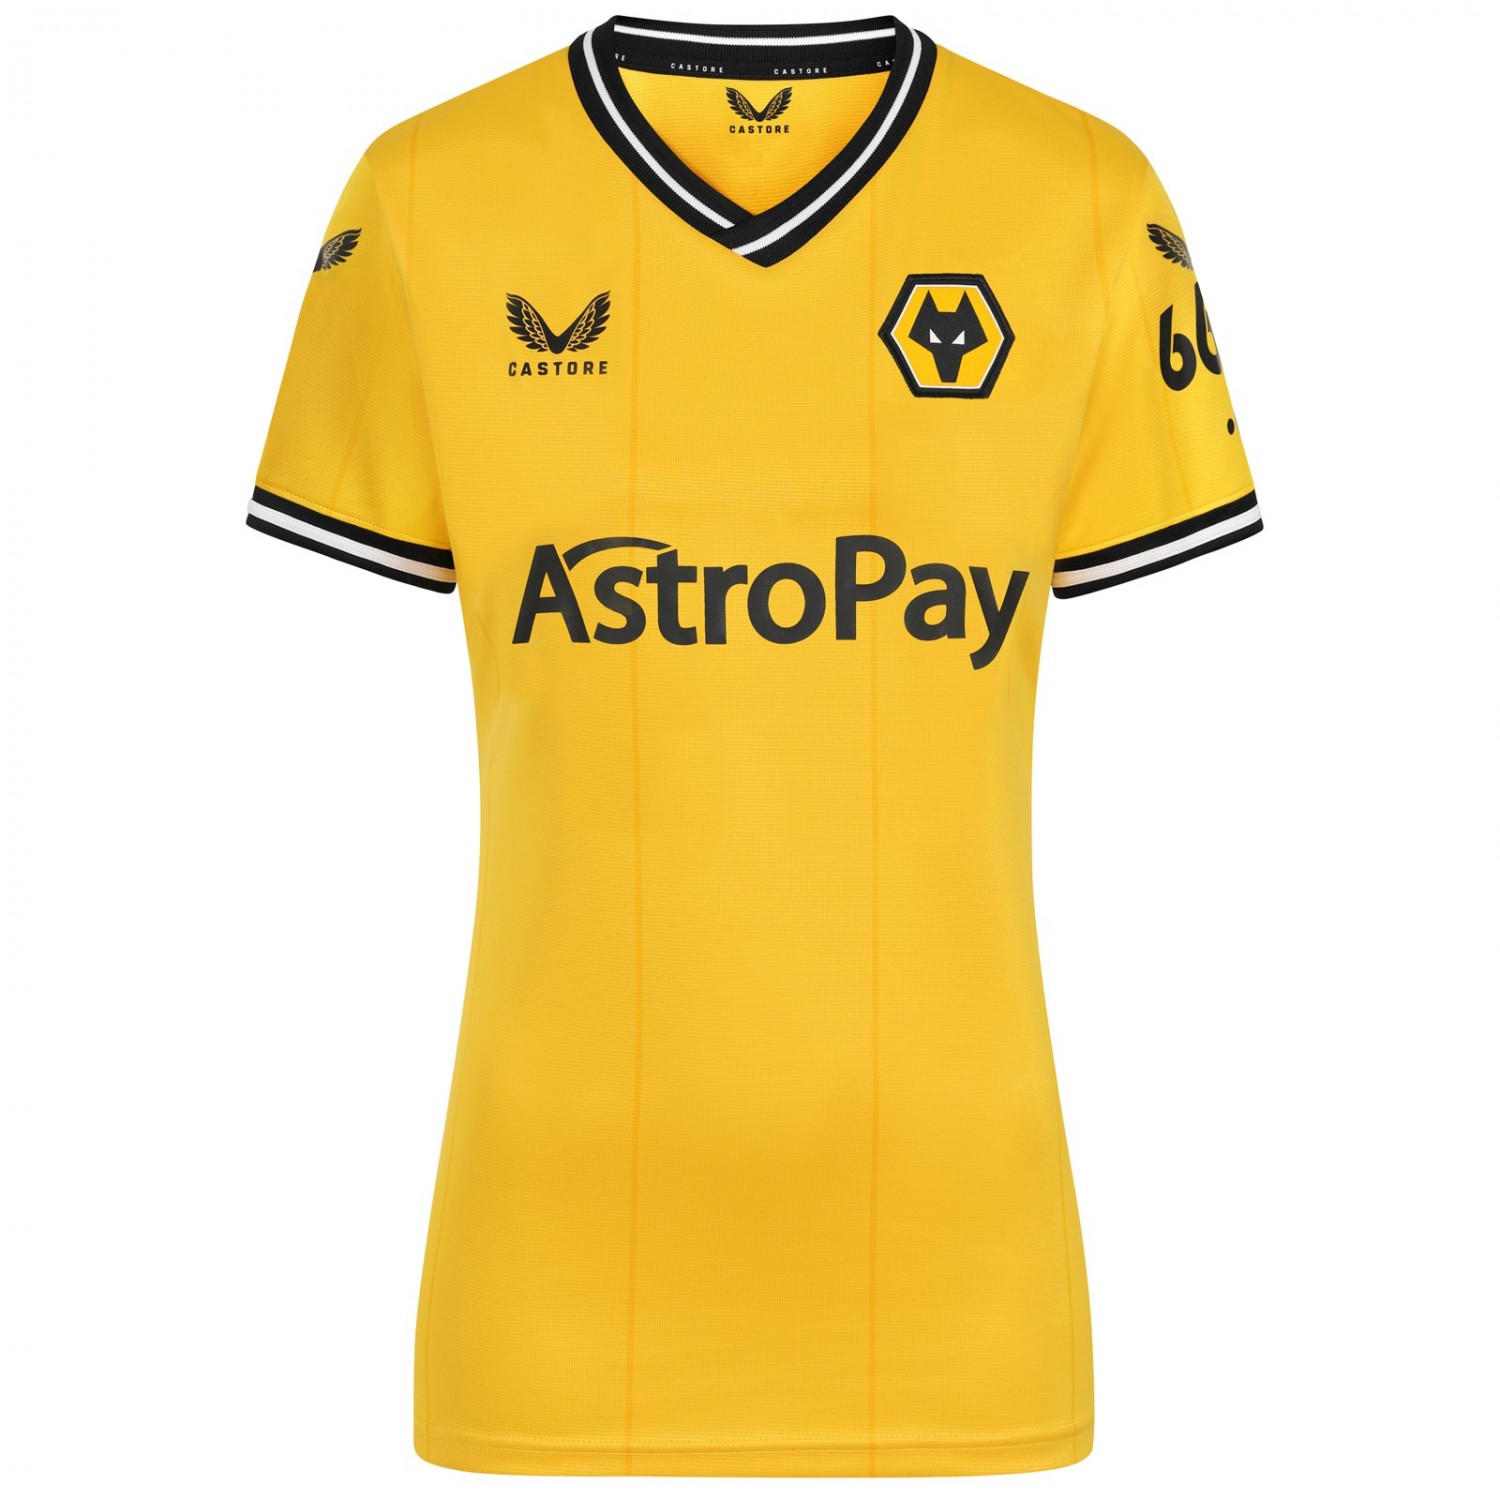 2023-24 wolves home shirt - womens
the 2023-24 wolves home shirt for women is a must have for any wolves fan's wardrobe.
Made from 100% Polyester,this shirt is light and comfortable to wear all day long. the intricate detailing on the shirt showcases the club's rich heritage, with the iconic wolves logo being proudly displayed on the chest.
the shirt's wolves gold colorway is sure to make you stand out in the crowd.
the design of the shirt has been specifically crafted with a female silhouette, making it perfect for wearing to games or just showing off your love for the club. 